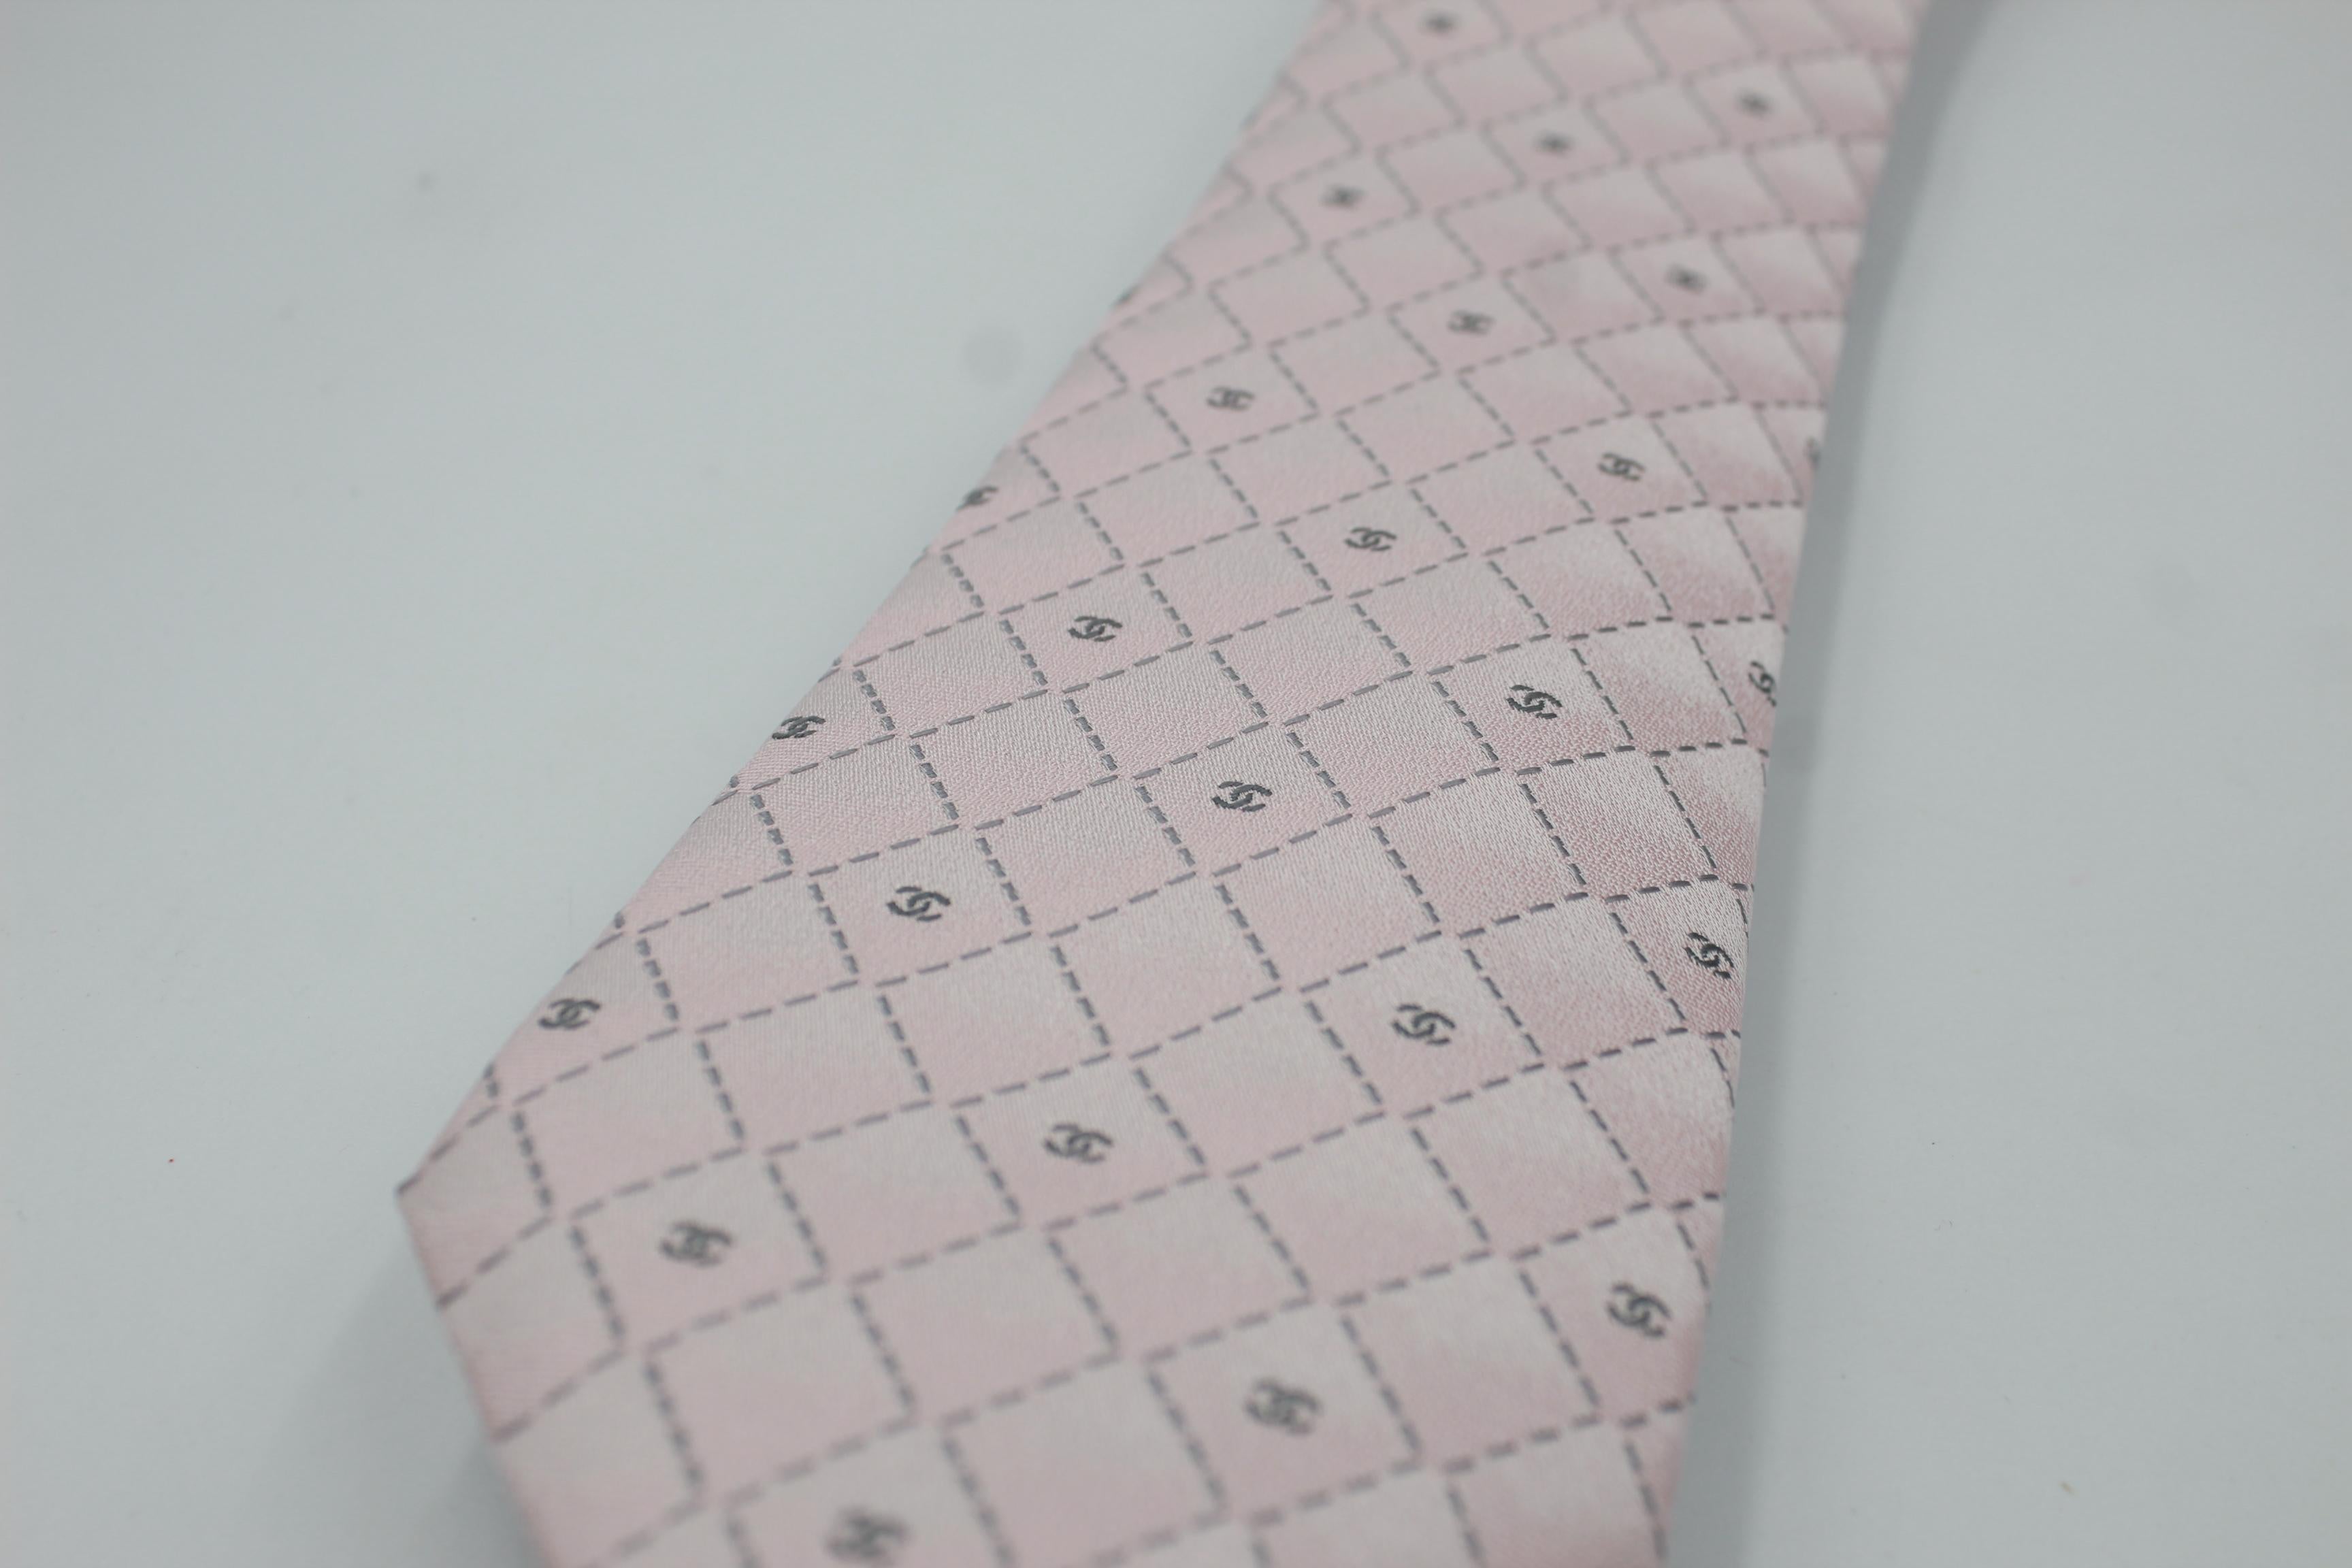 Chanel tie in pink silk.
Very good condition. 